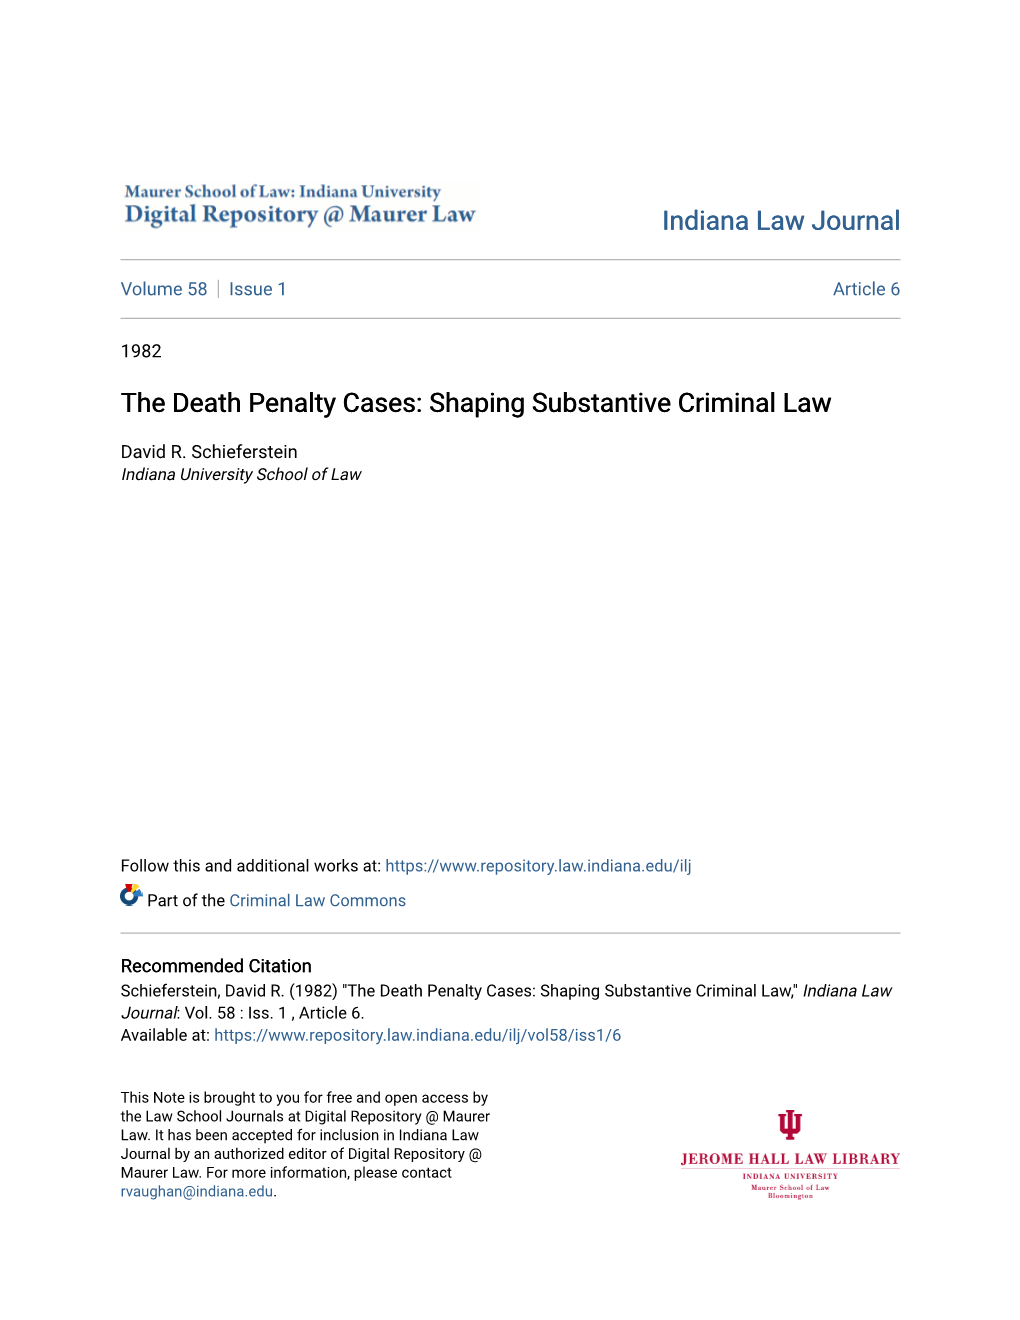 The Death Penalty Cases: Shaping Substantive Criminal Law